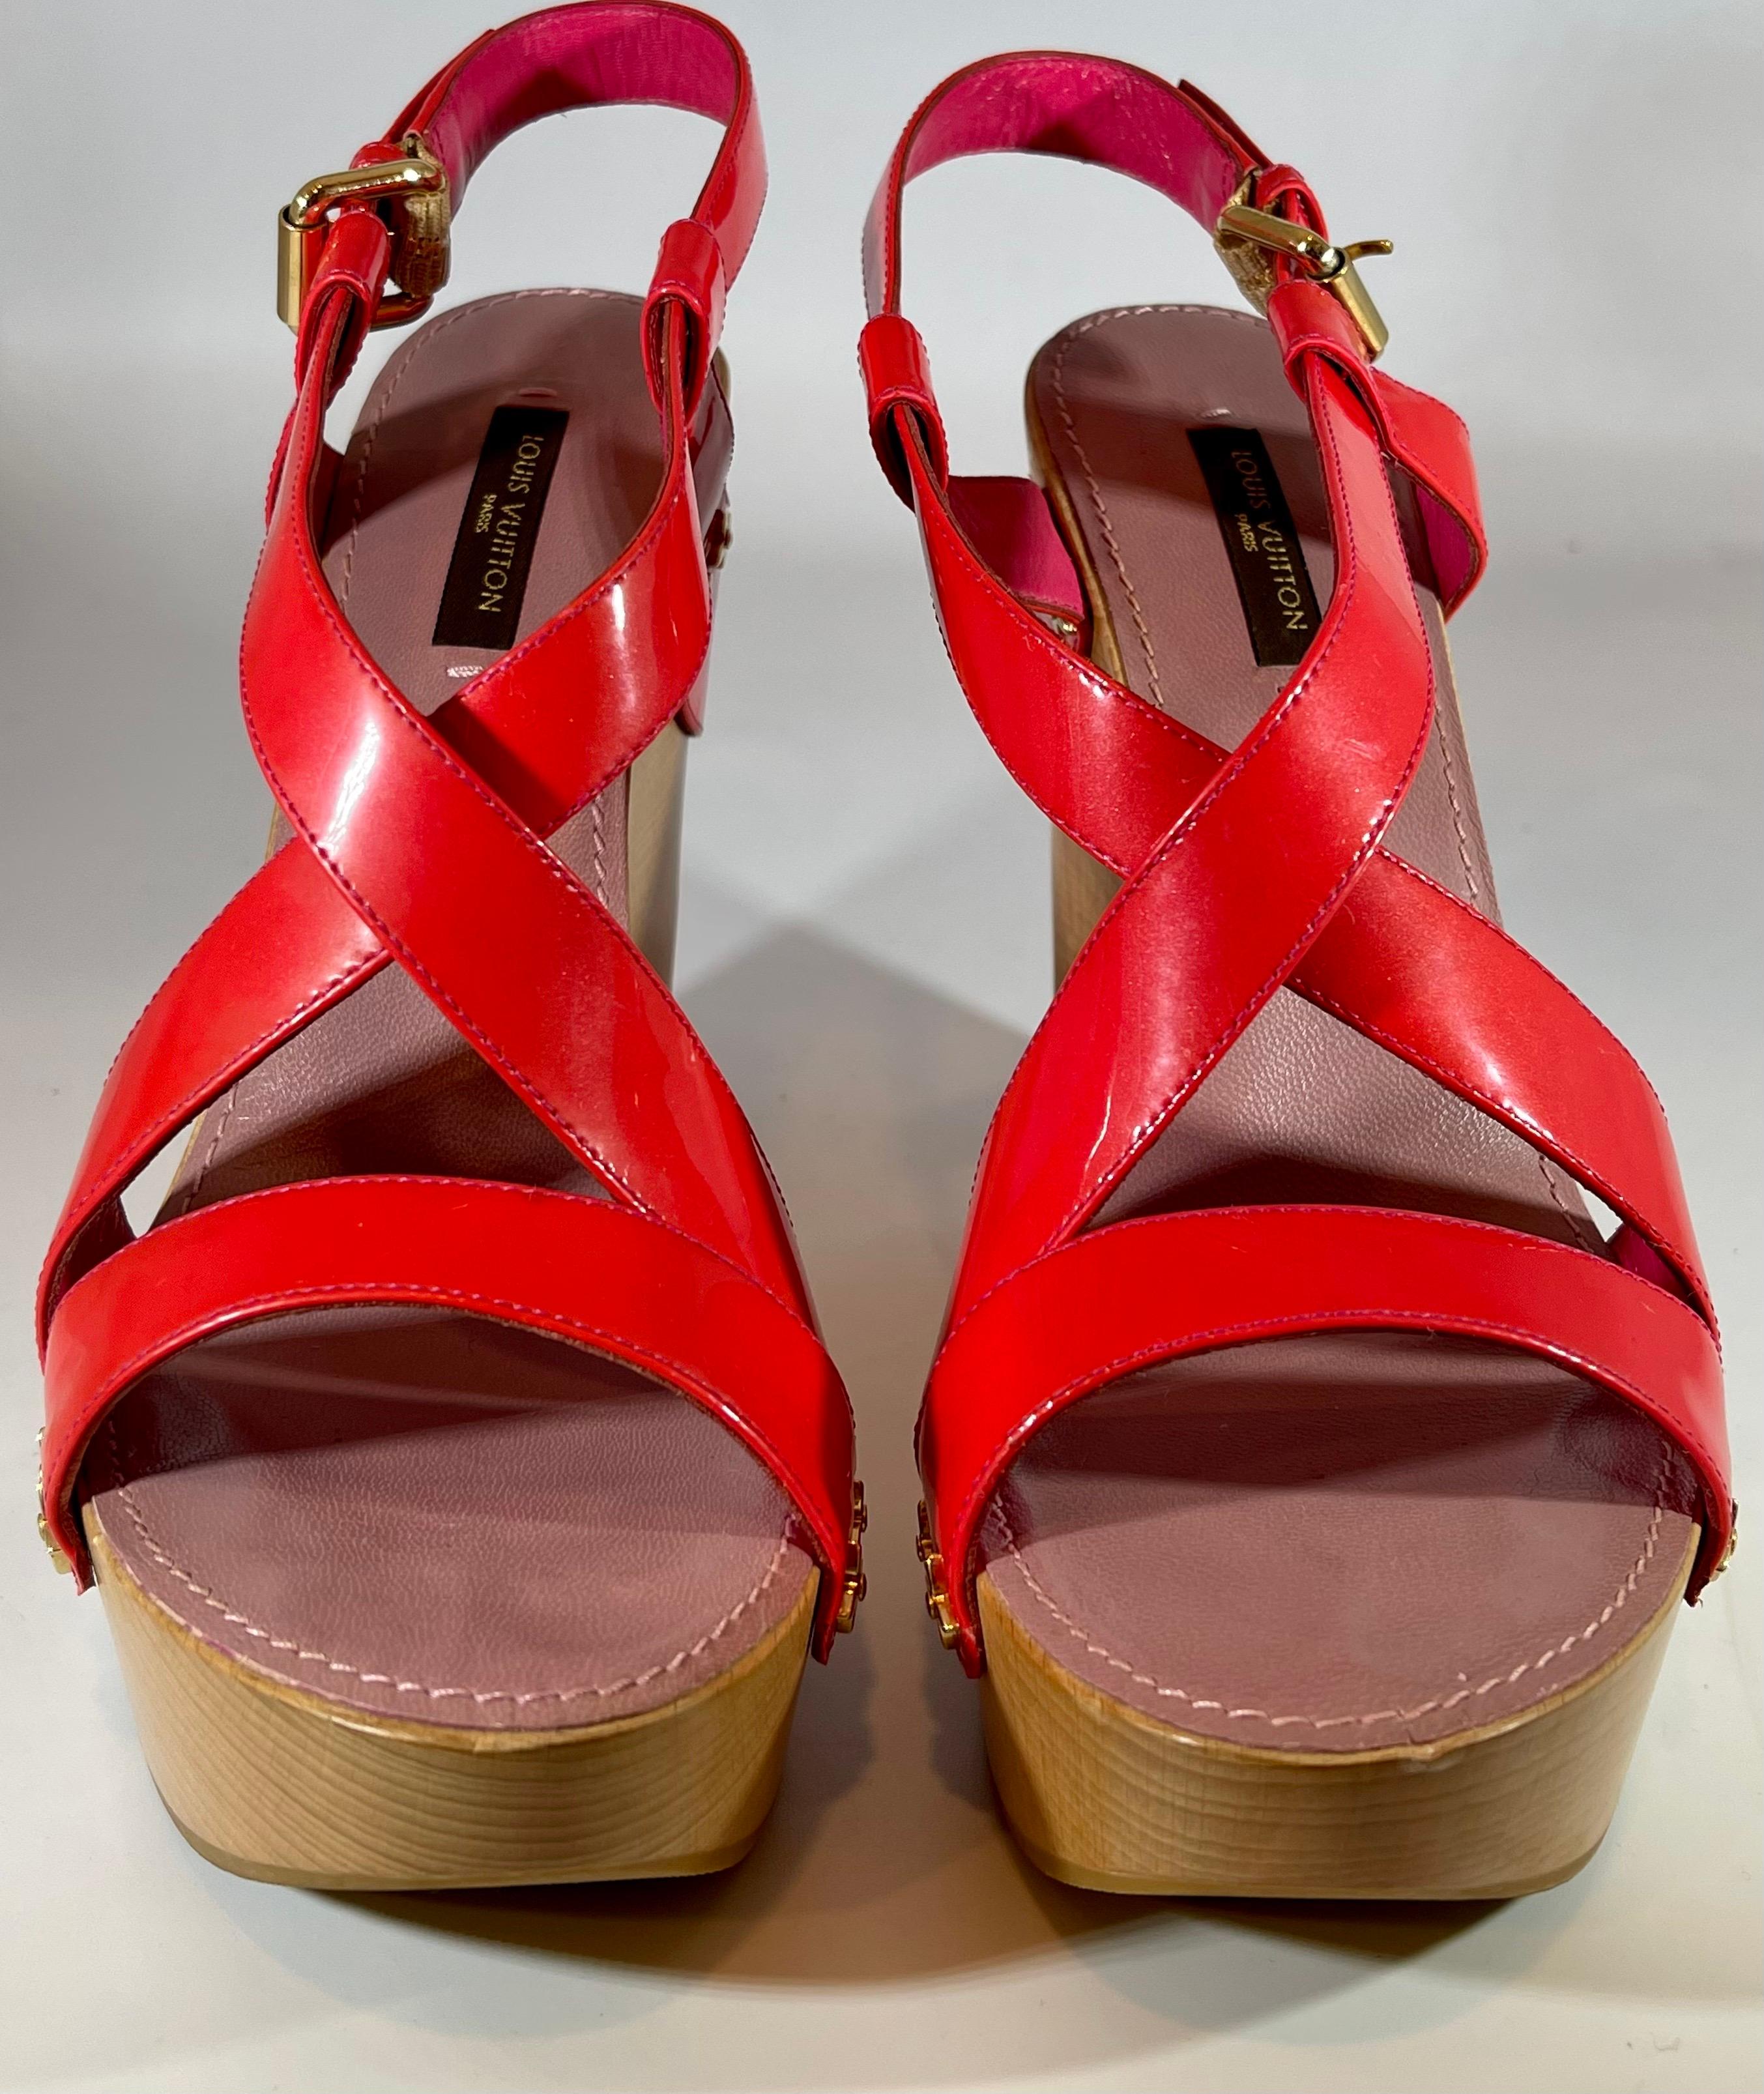 Louis Vuitton Sandals Reds Calf Leather 5 Inch Wood Heels Size Euro 38, Like New
Main color Red
Material Calf Leather
Serial # CL 0098
Maximum Width 7 cm /2.75 Inches
Heel Hight 12.5 cm / 4.92 inch
Made in Italy 
Women/Ladies
Black and white hi-top